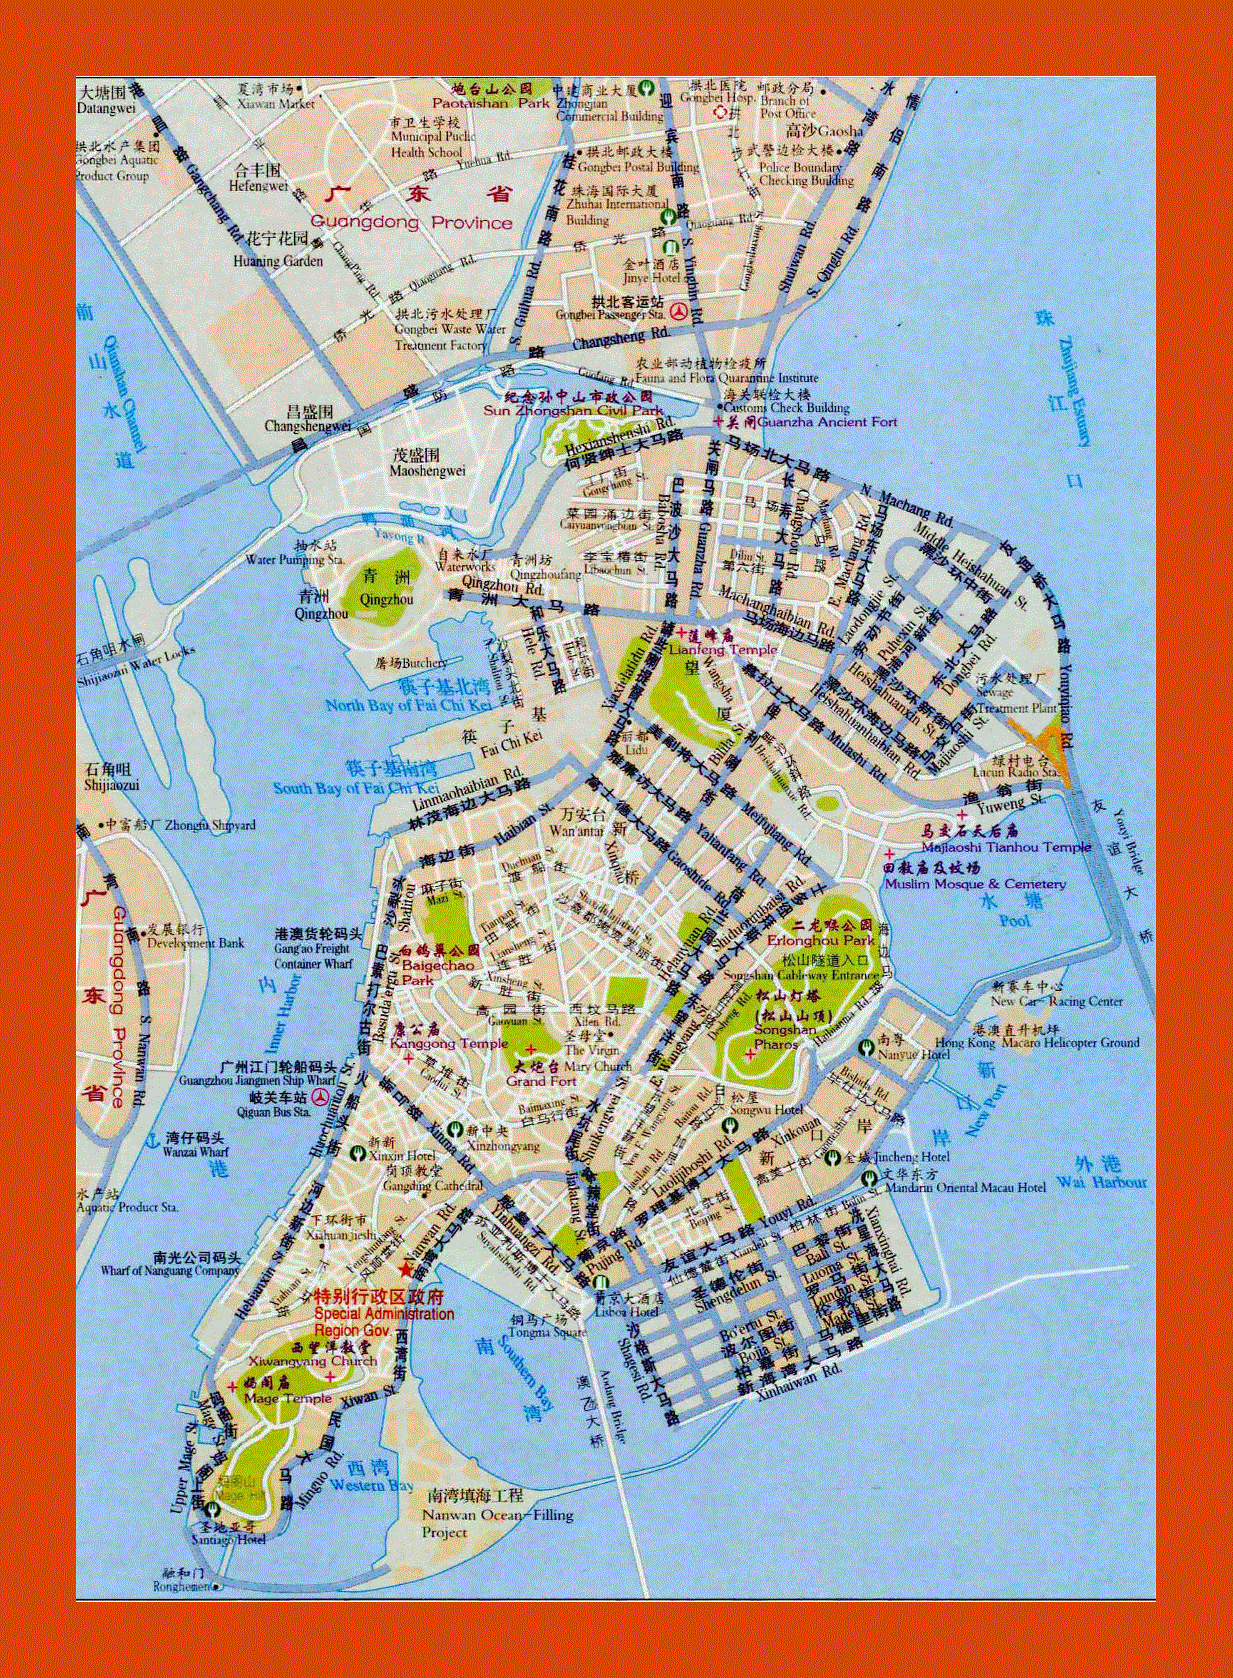 Road map of Macau in chinese